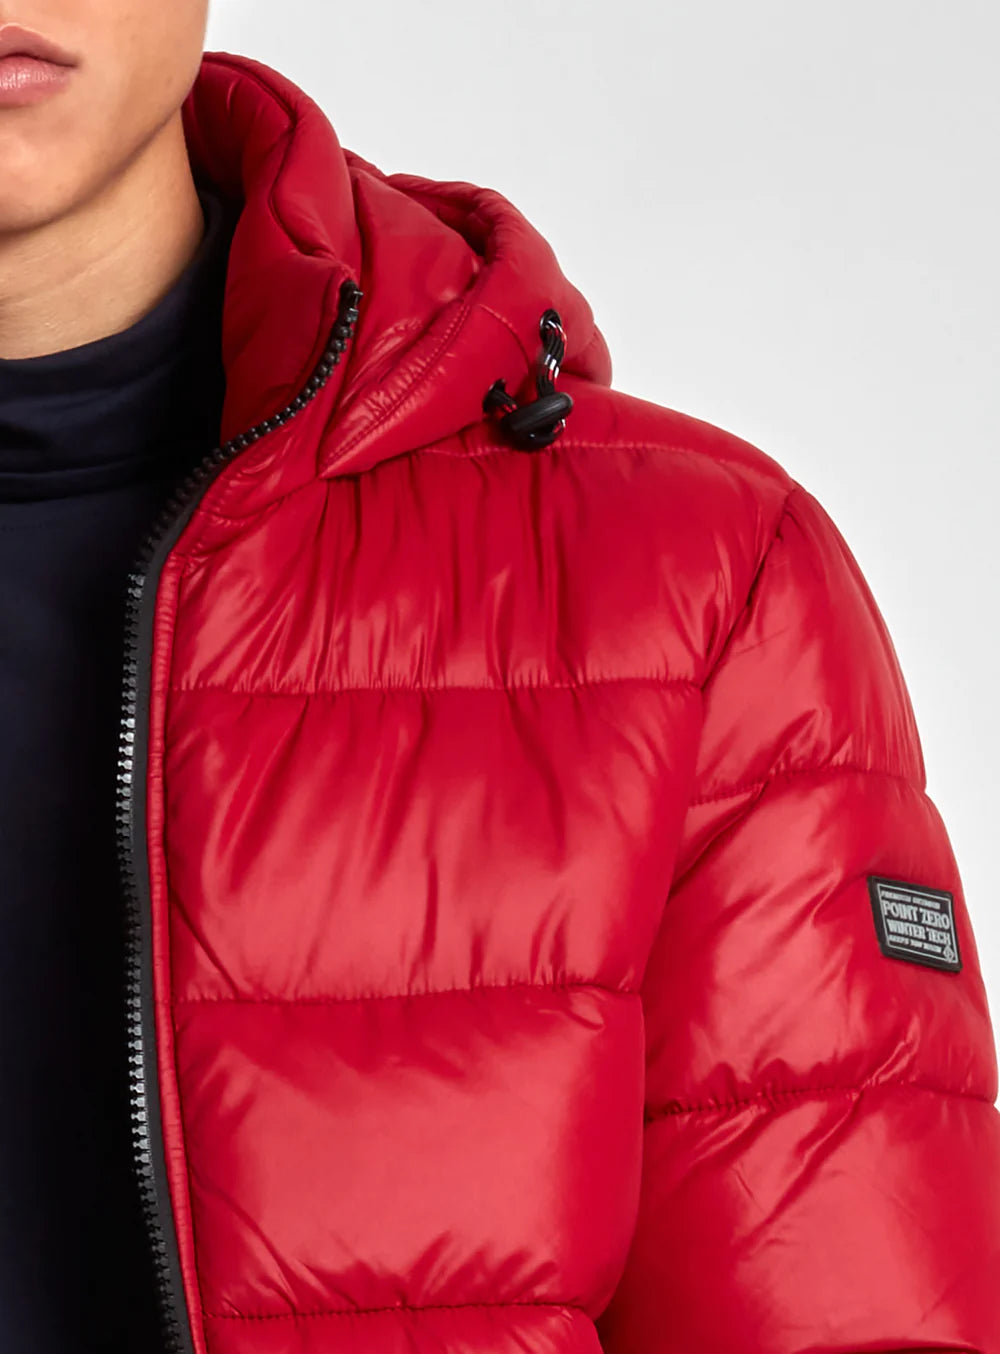 EDDISION Midweight Ultralight Jacket - Red